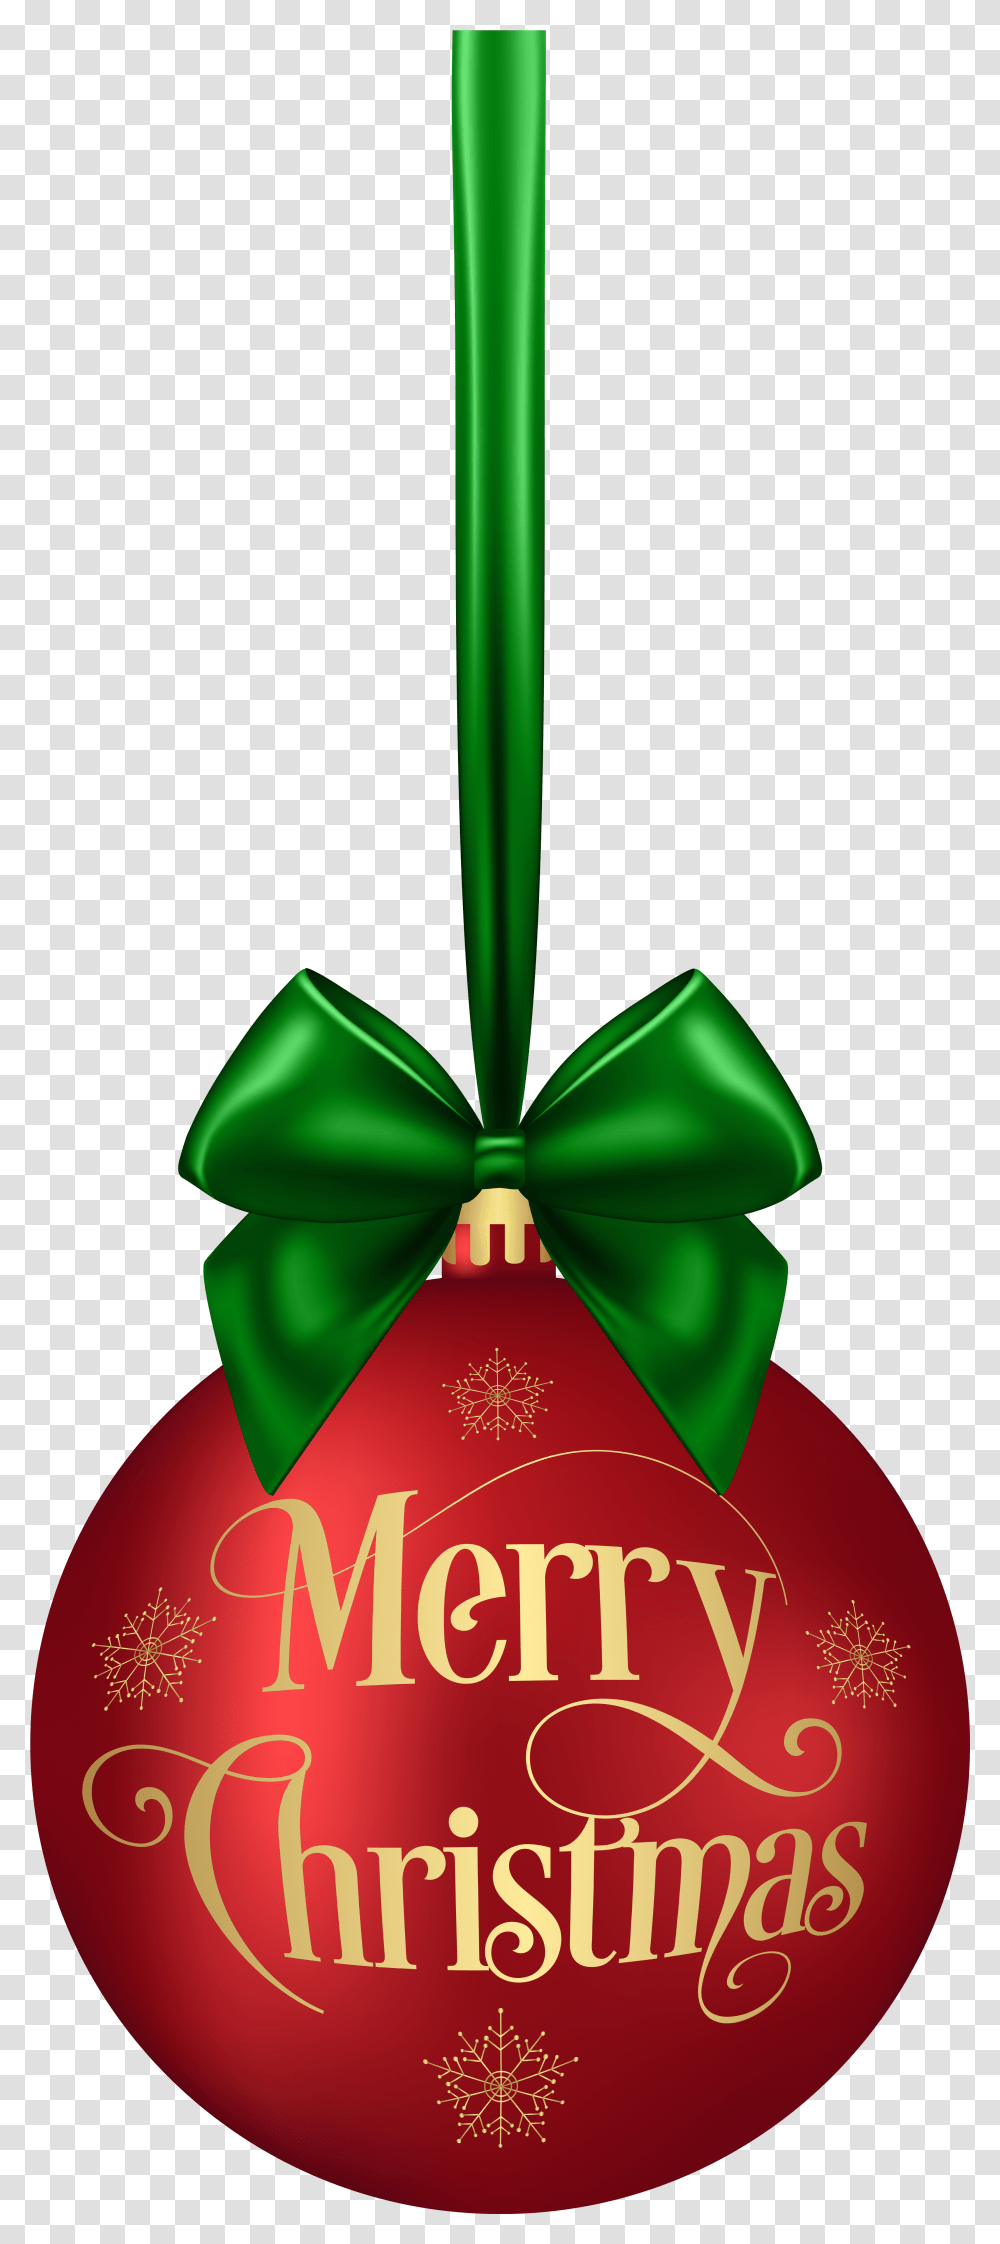 Download Free Merry Christmas Ball Red Clip Art Deco Merry Christmas Ball, Ornament, Bottle Transparent Png